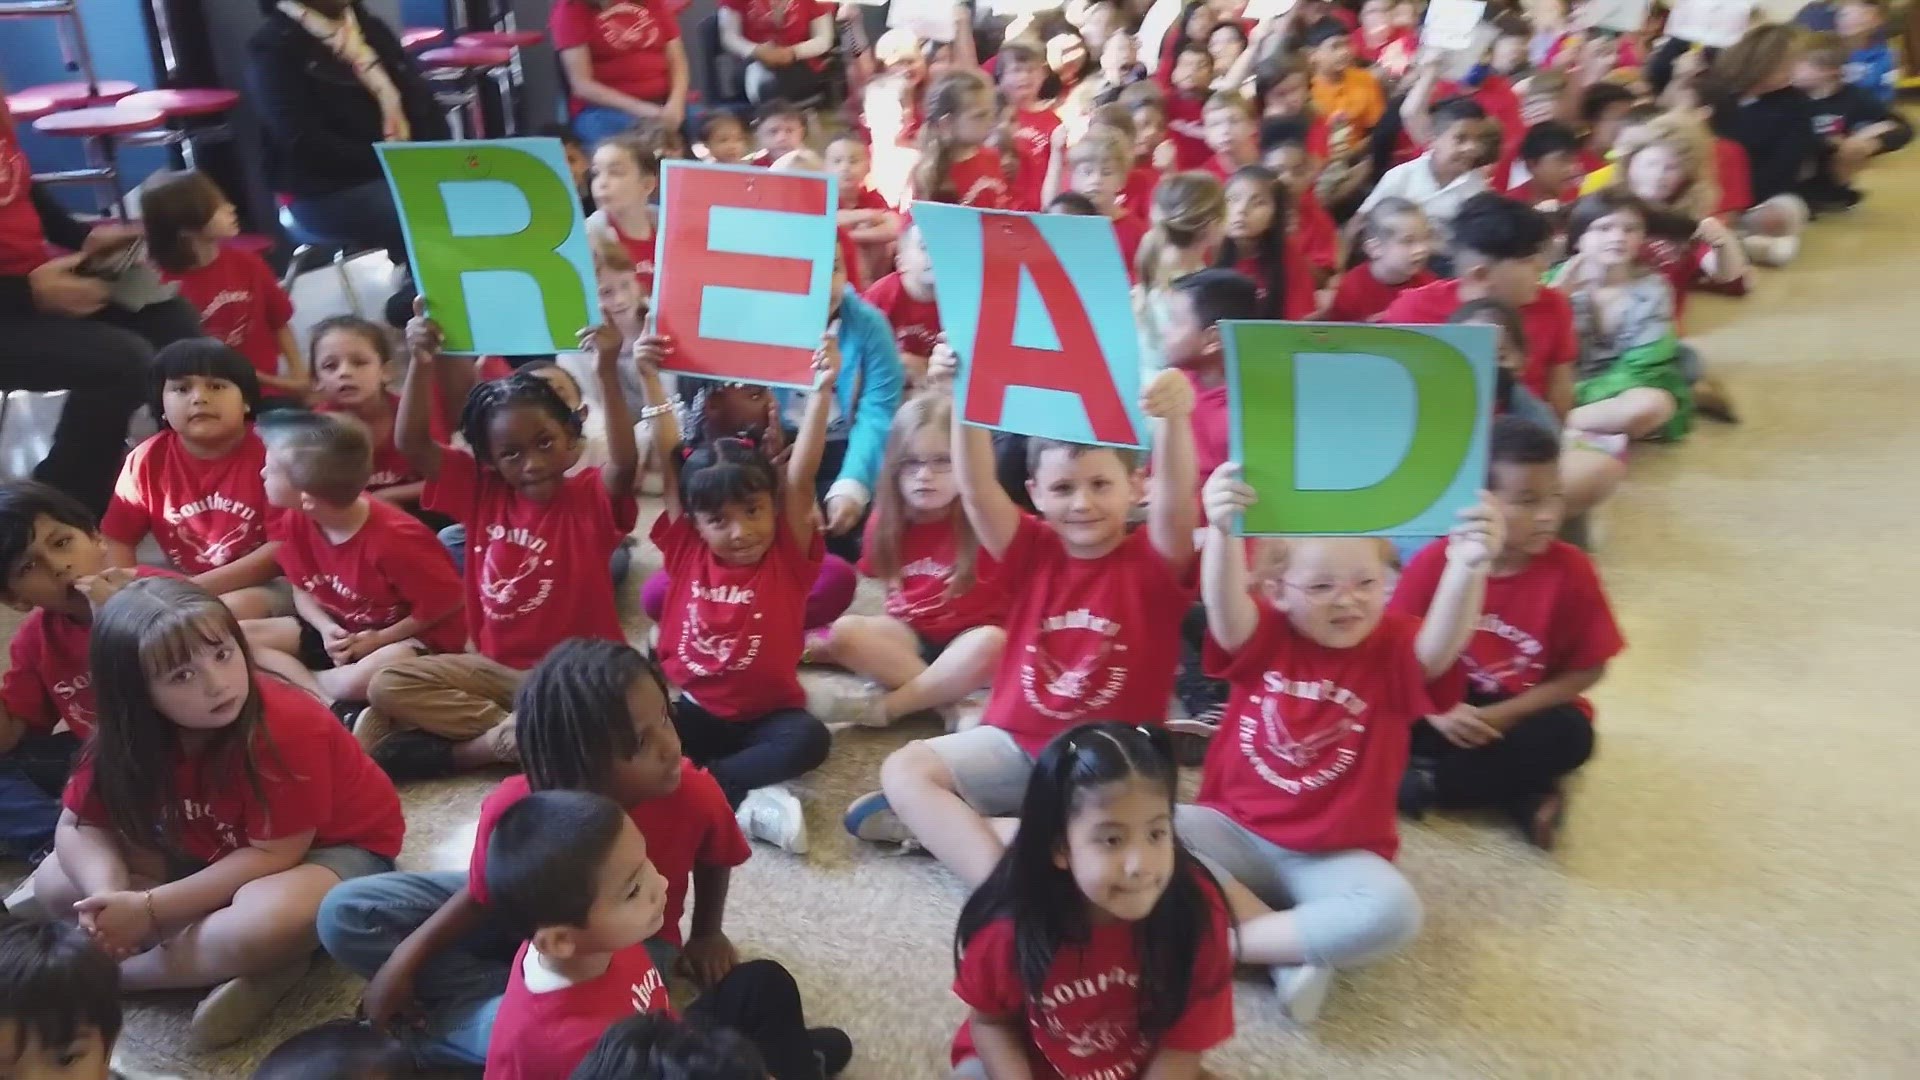 The Read 2 Succeed crew made their final trip of the school year to Southern Elementary School to share the importance of reading.